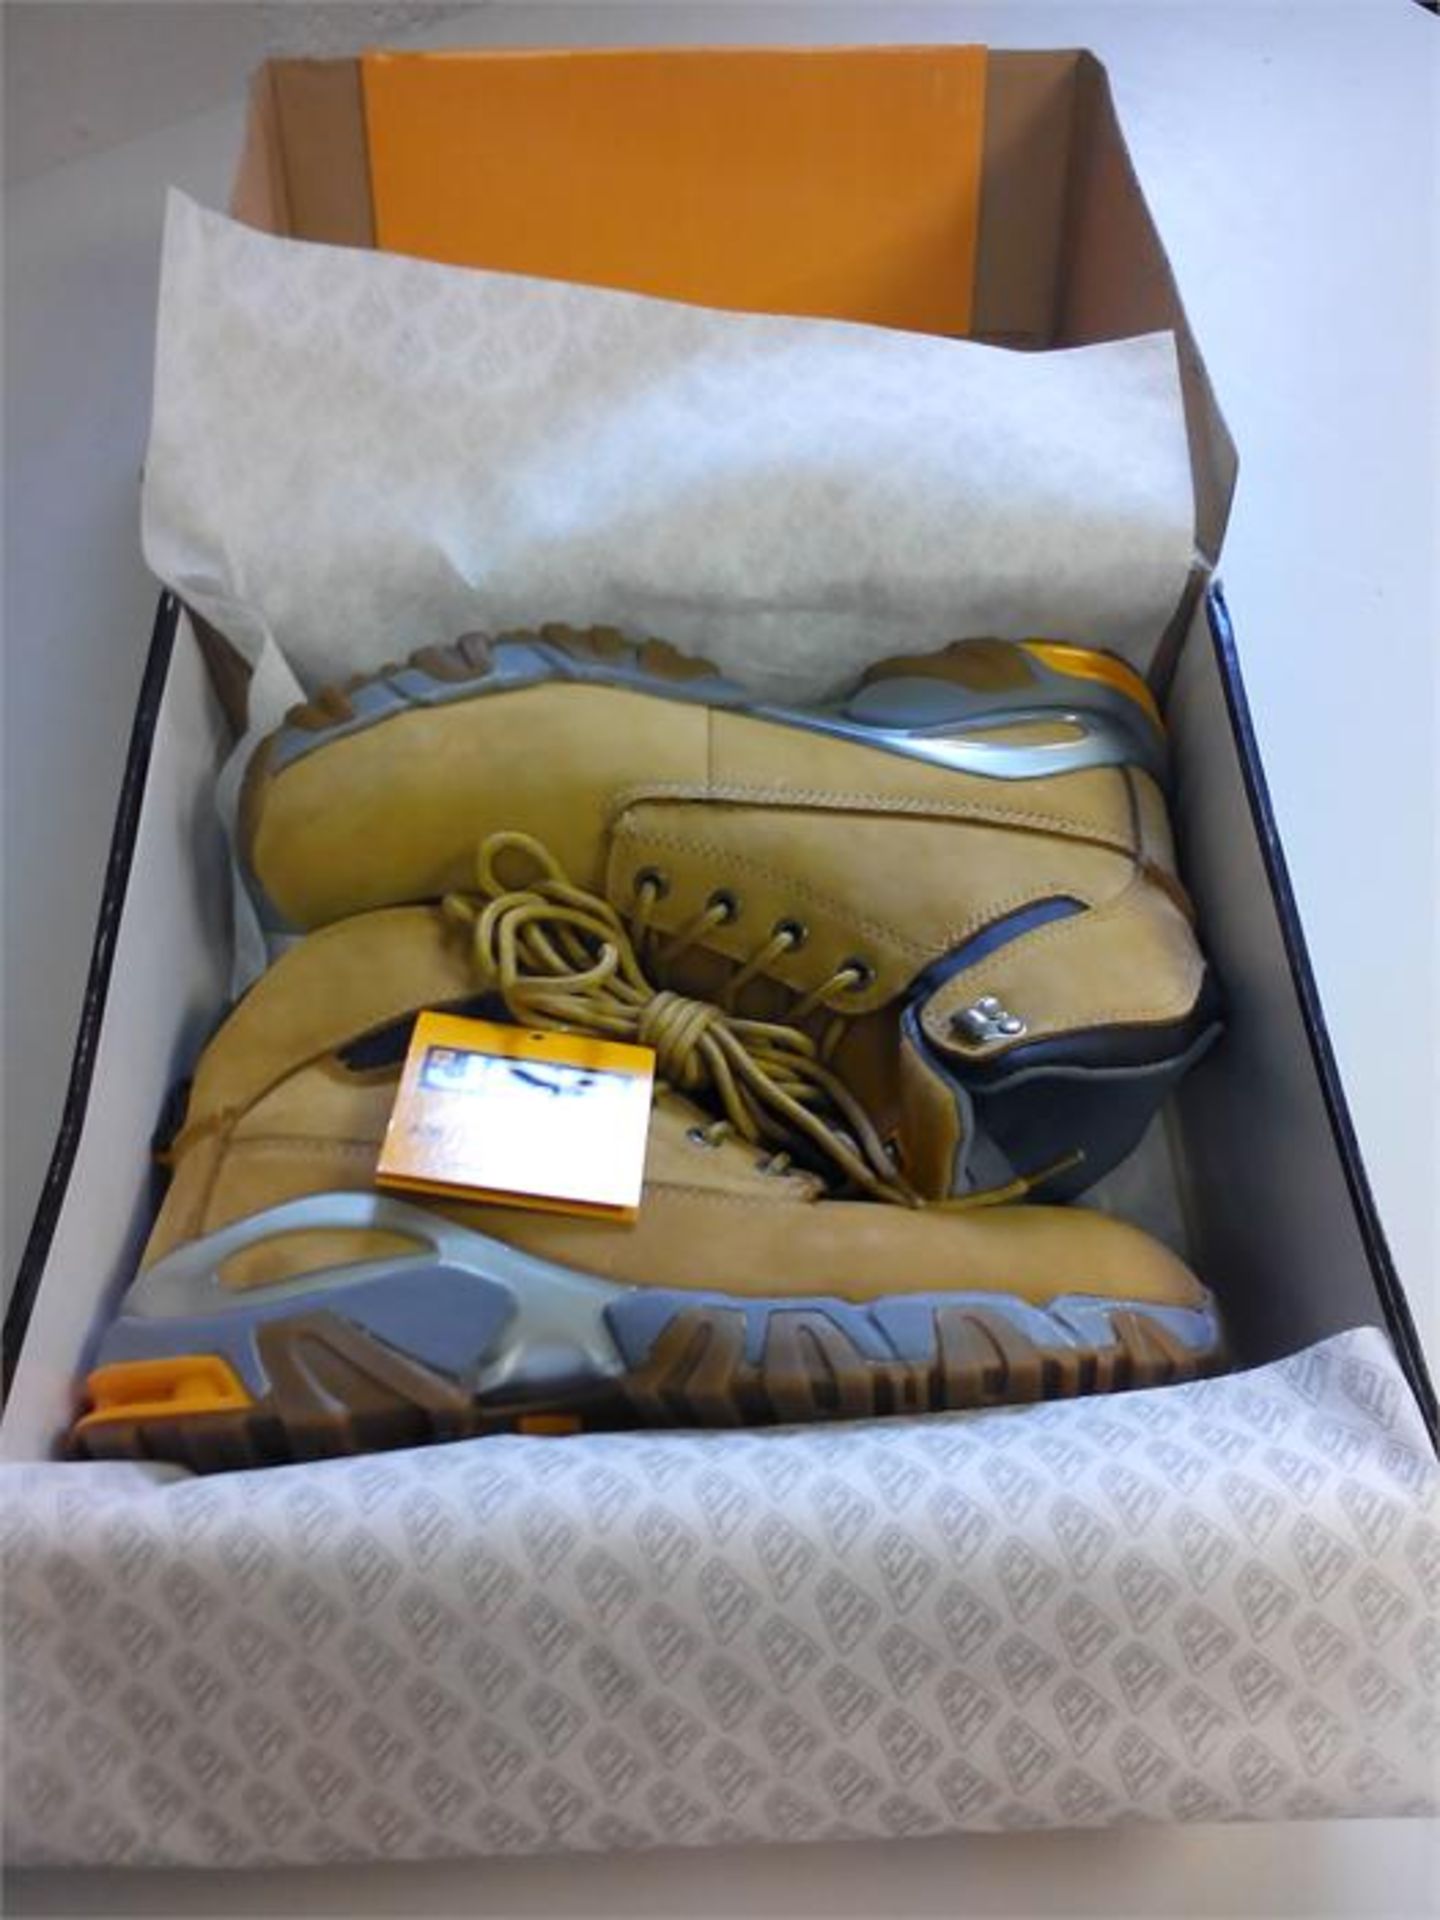 JCB Honey Safety Boots NEW Boxed - RRP £40 - UK Size 10 / USA 11 / EURO 44 - Colour/Material: - Image 2 of 2